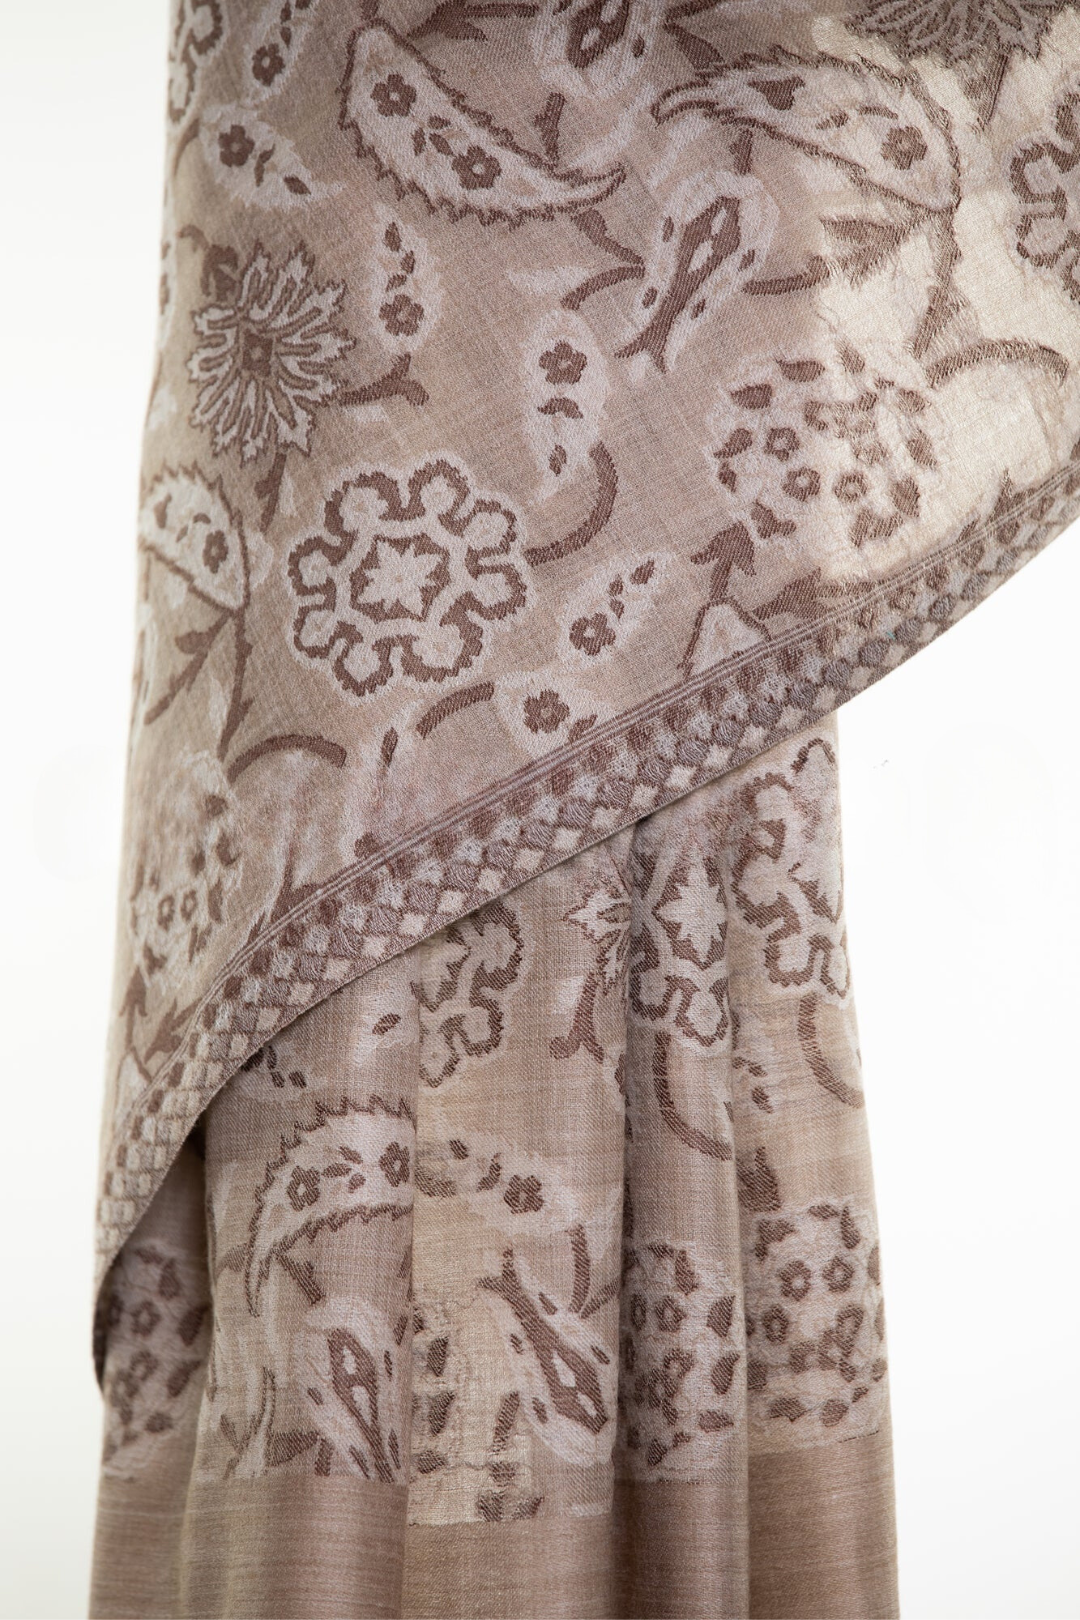 Abstract Floral Paisley Cashmere Pashmina Shawl - Natural Cream